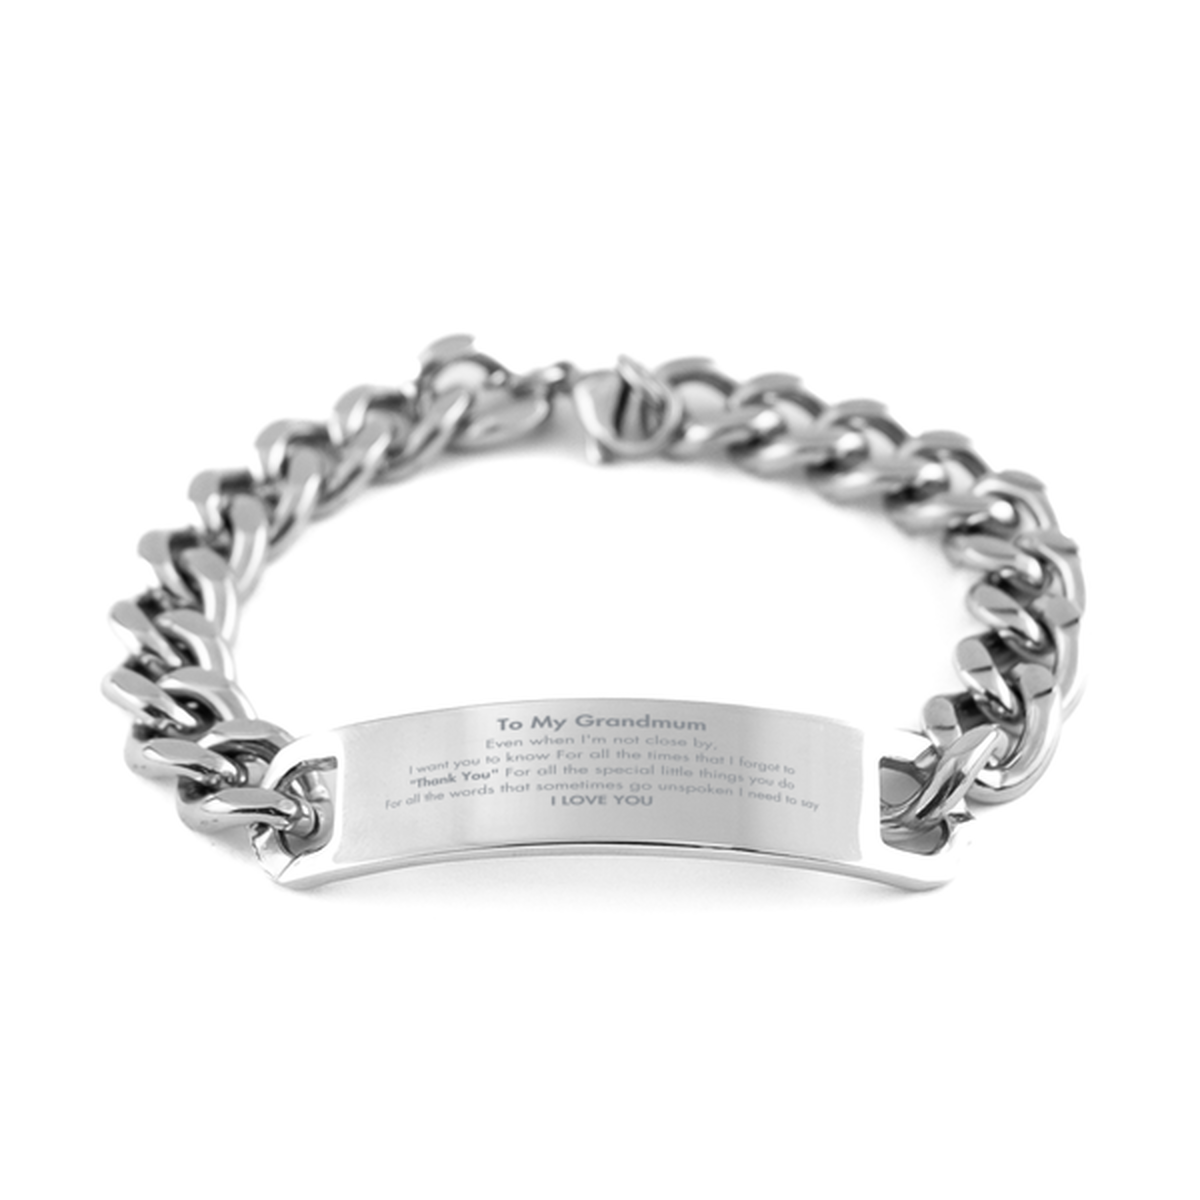 Thank You Gifts for Grandmum, Keepsake Cuban Chain Stainless Steel Bracelet Gifts for Grandmum Birthday Mother's day Father's Day Grandmum For all the words That sometimes go unspoken I need to say I LOVE YOU